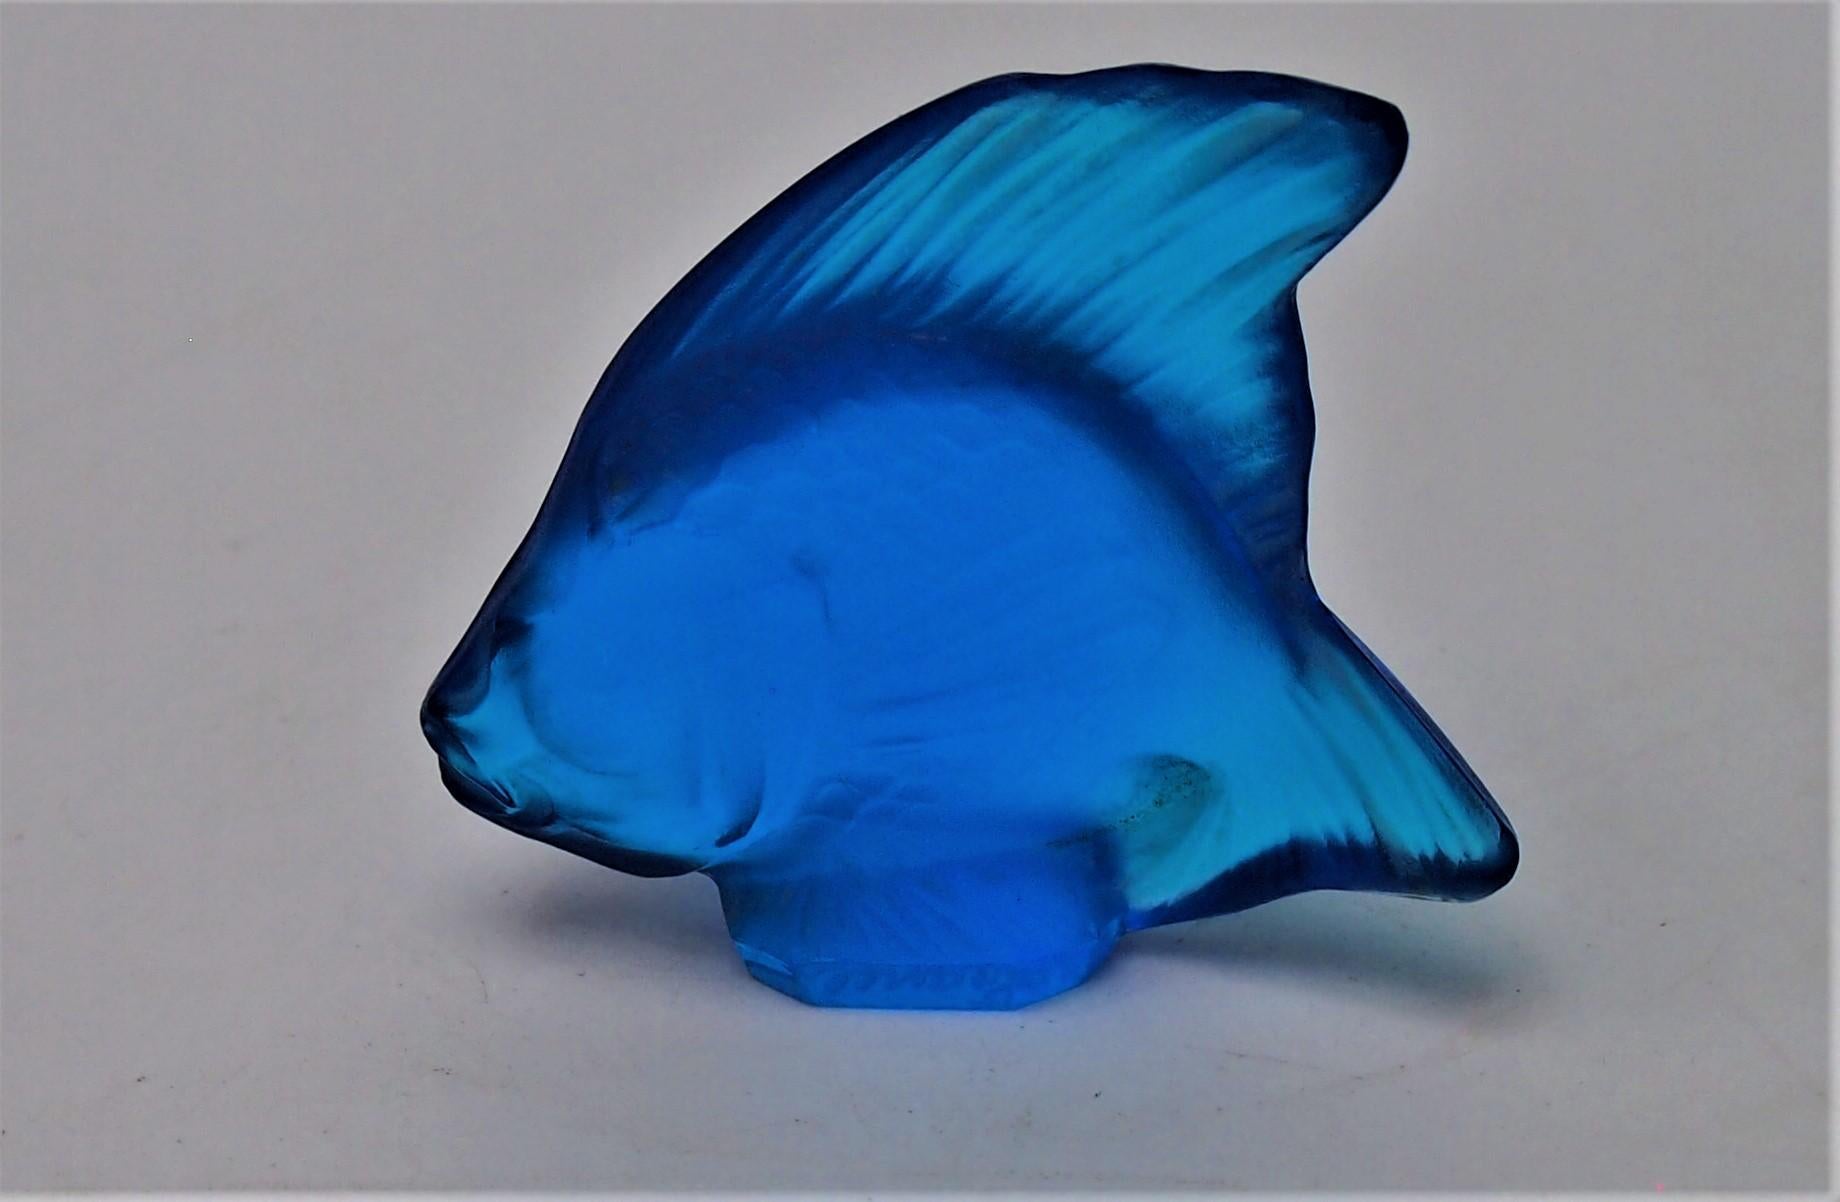 Super rare Rene Lalique Electric Blue glass Poisson Cachet first designed 1913 -This example is from the early 1920s. One of the most famous pieces designed and produced by Rene Lalique -and still in production until recently - However the very